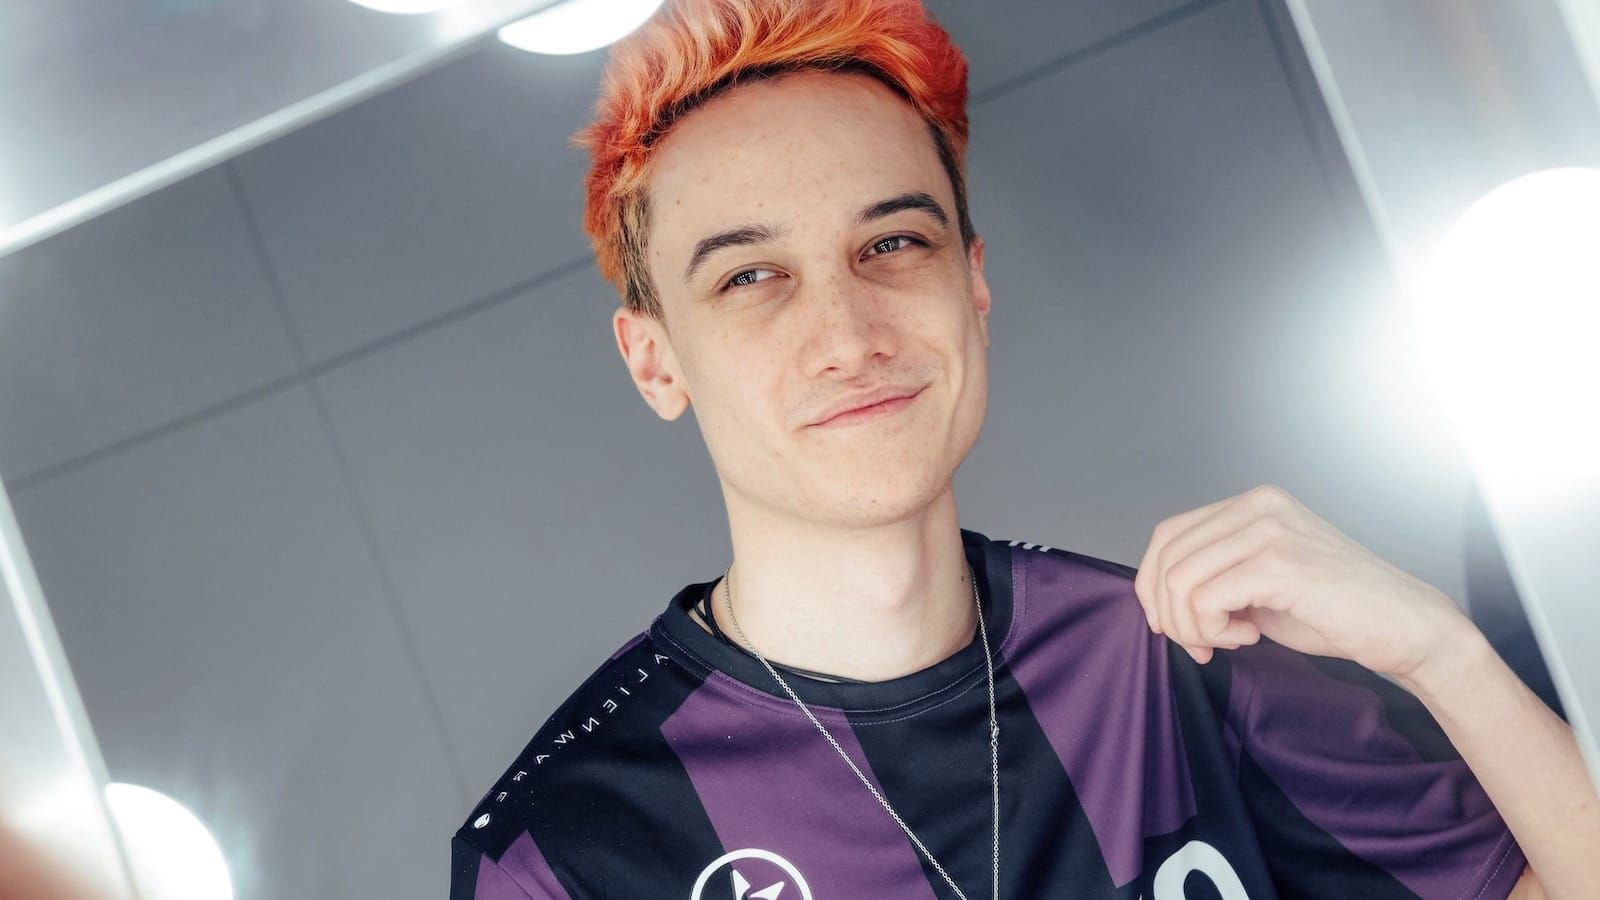 Close-up of League of Legends player Biopanther with a slight smile as he looks at himself and tugs at his jersey around his shoulder in a mirror